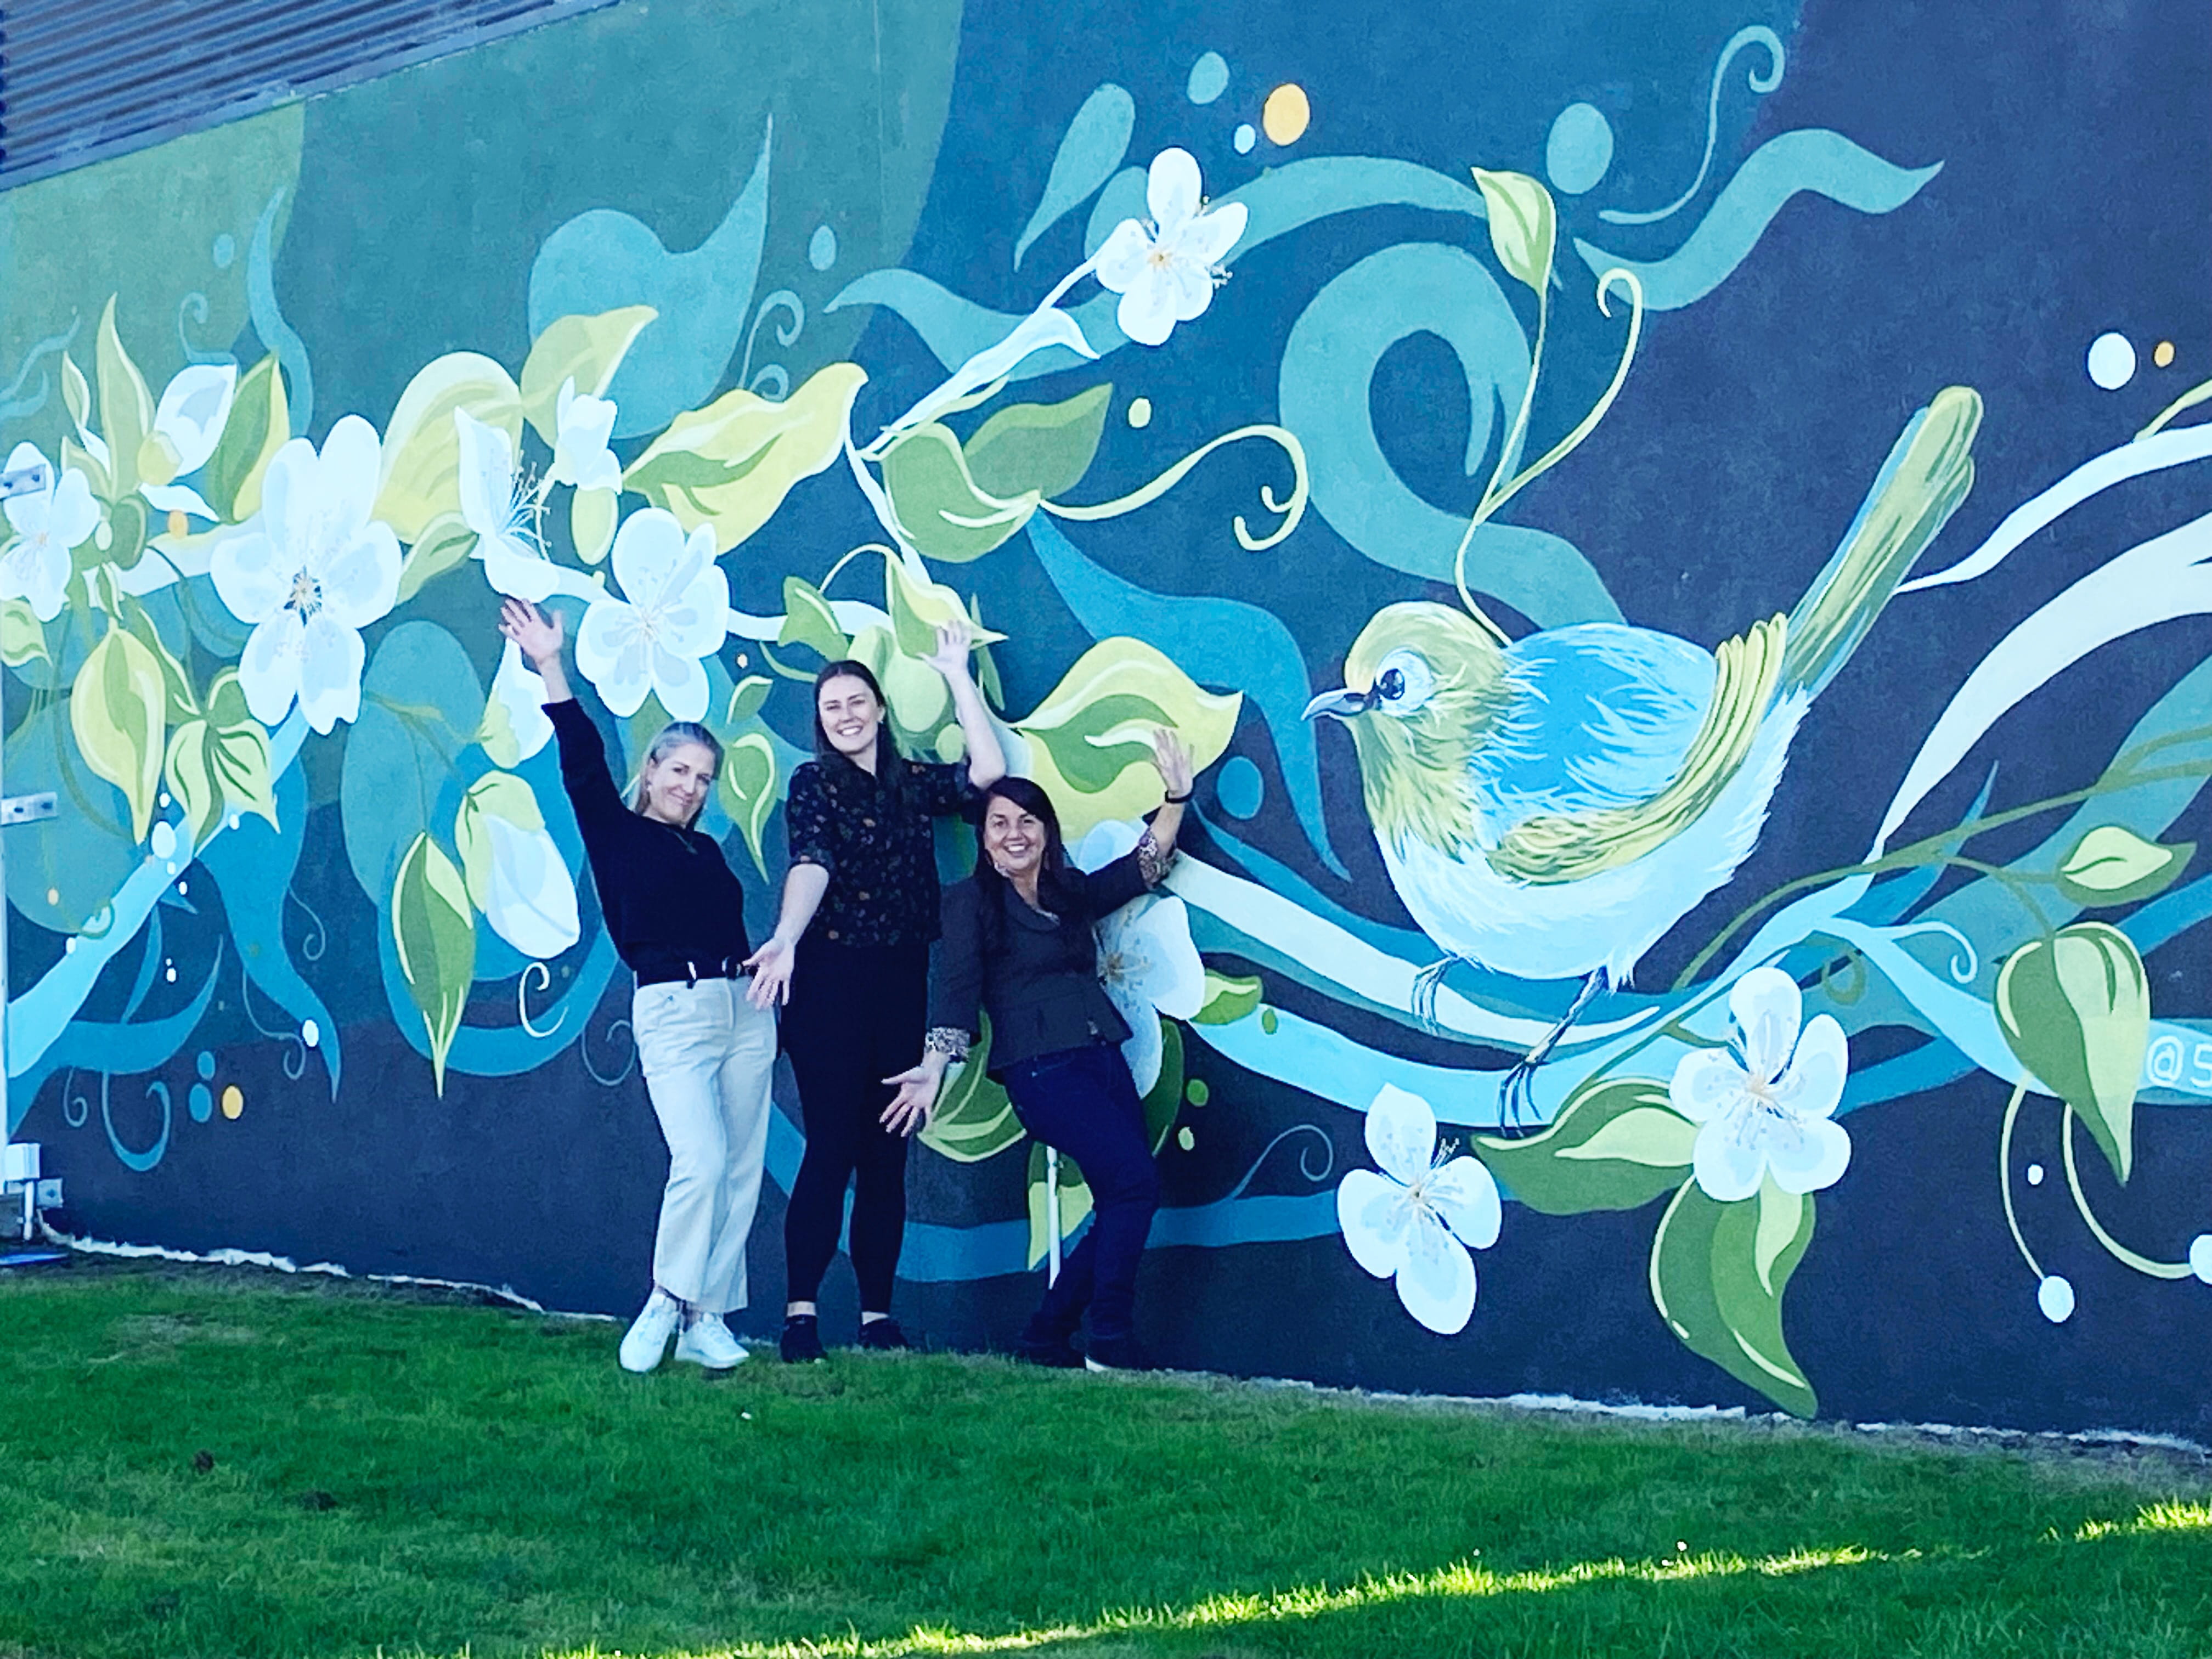 Three women with their hands in the air in front of a mural on wall depicting kiwifruit vine, flowers and a wax-eye bird.